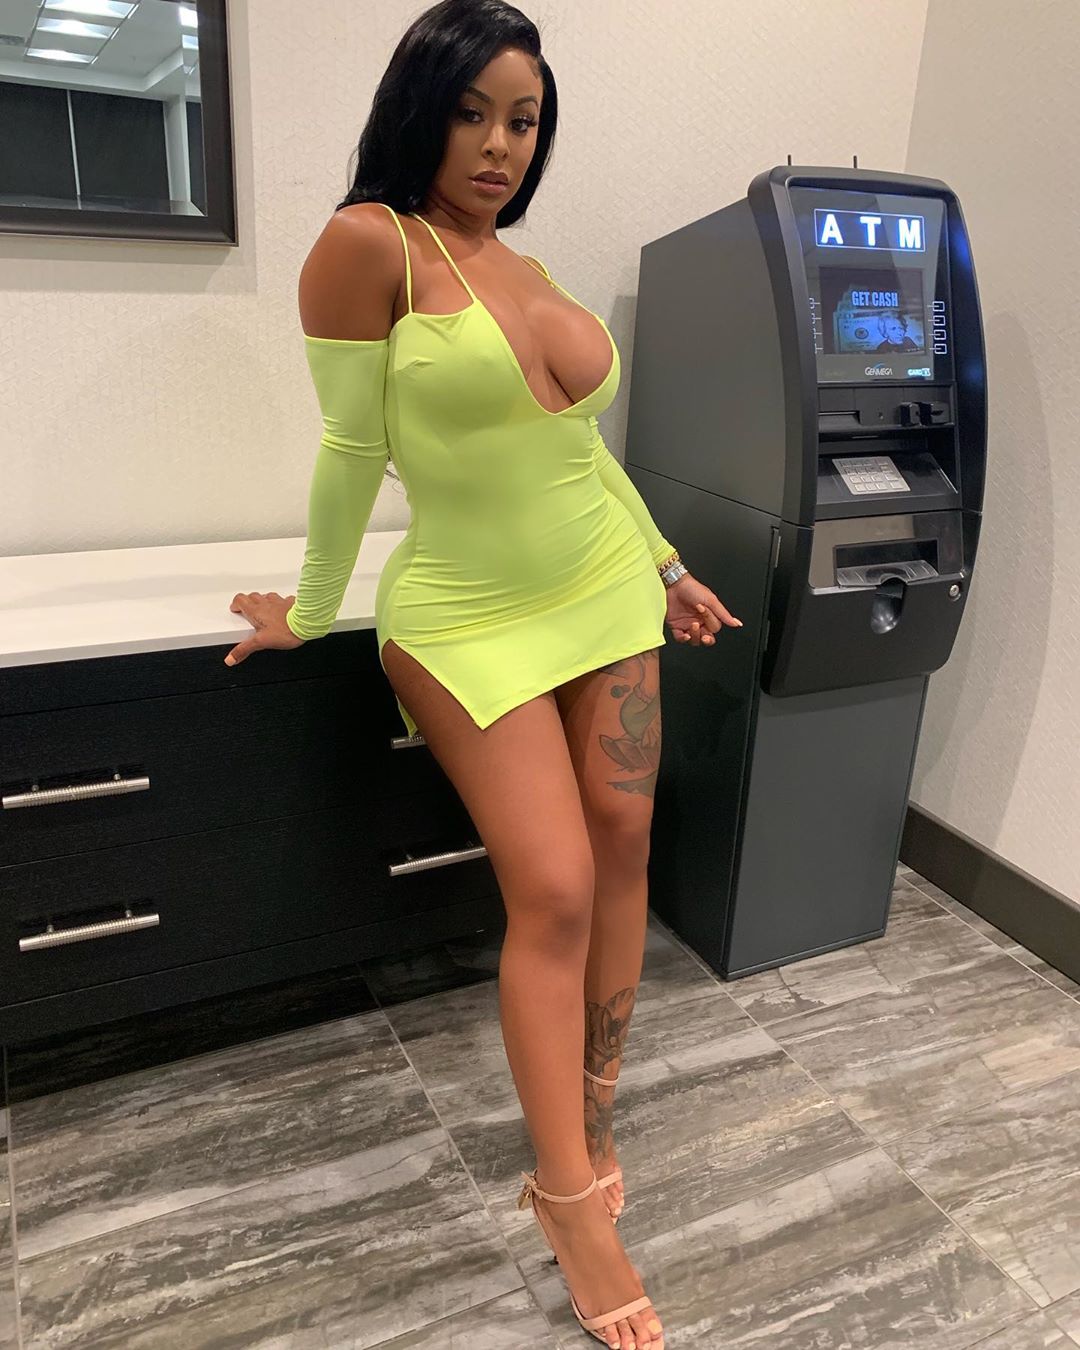 Reality star Alexis Skyy put her curves on full display in a photo posted t...